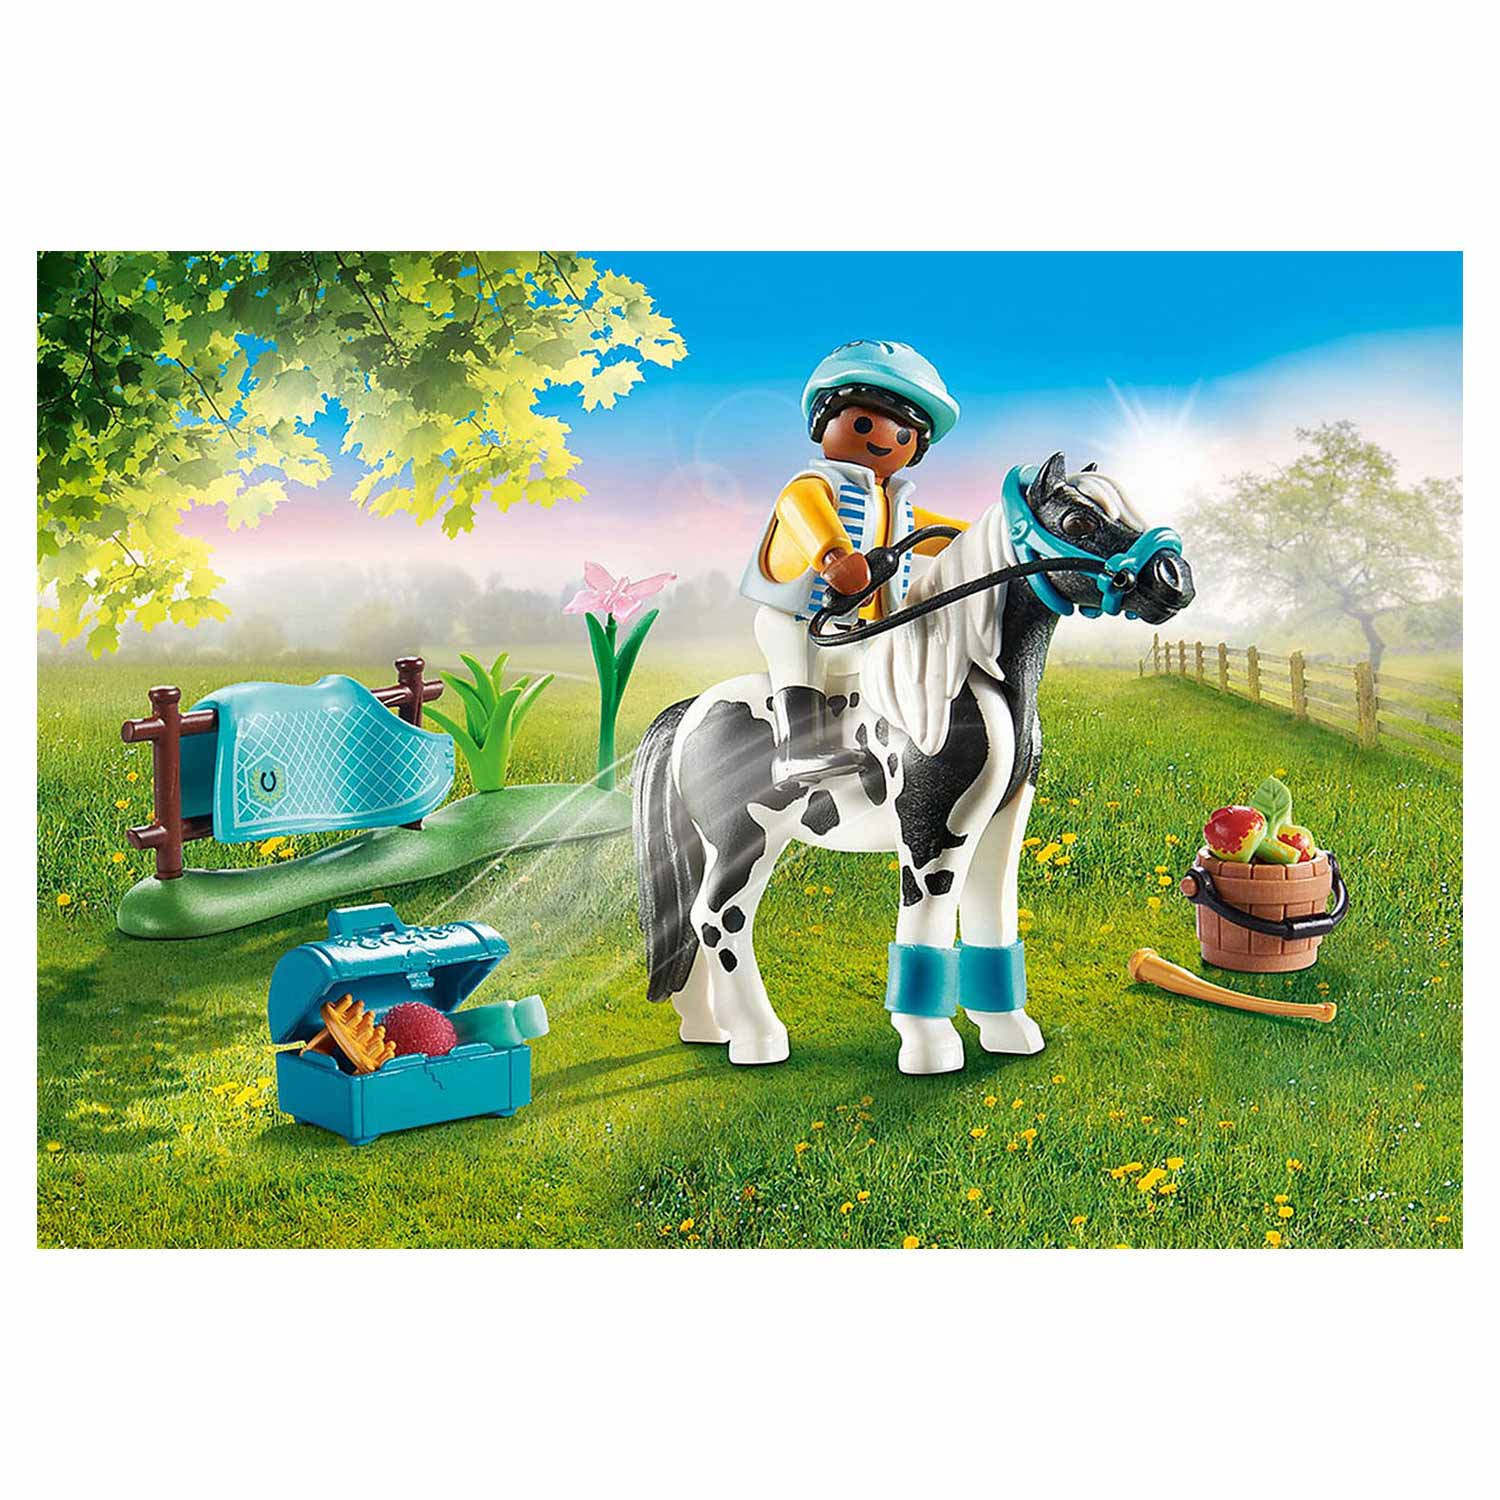 Playmobil Country Poney de collection Lewitzer - 70515